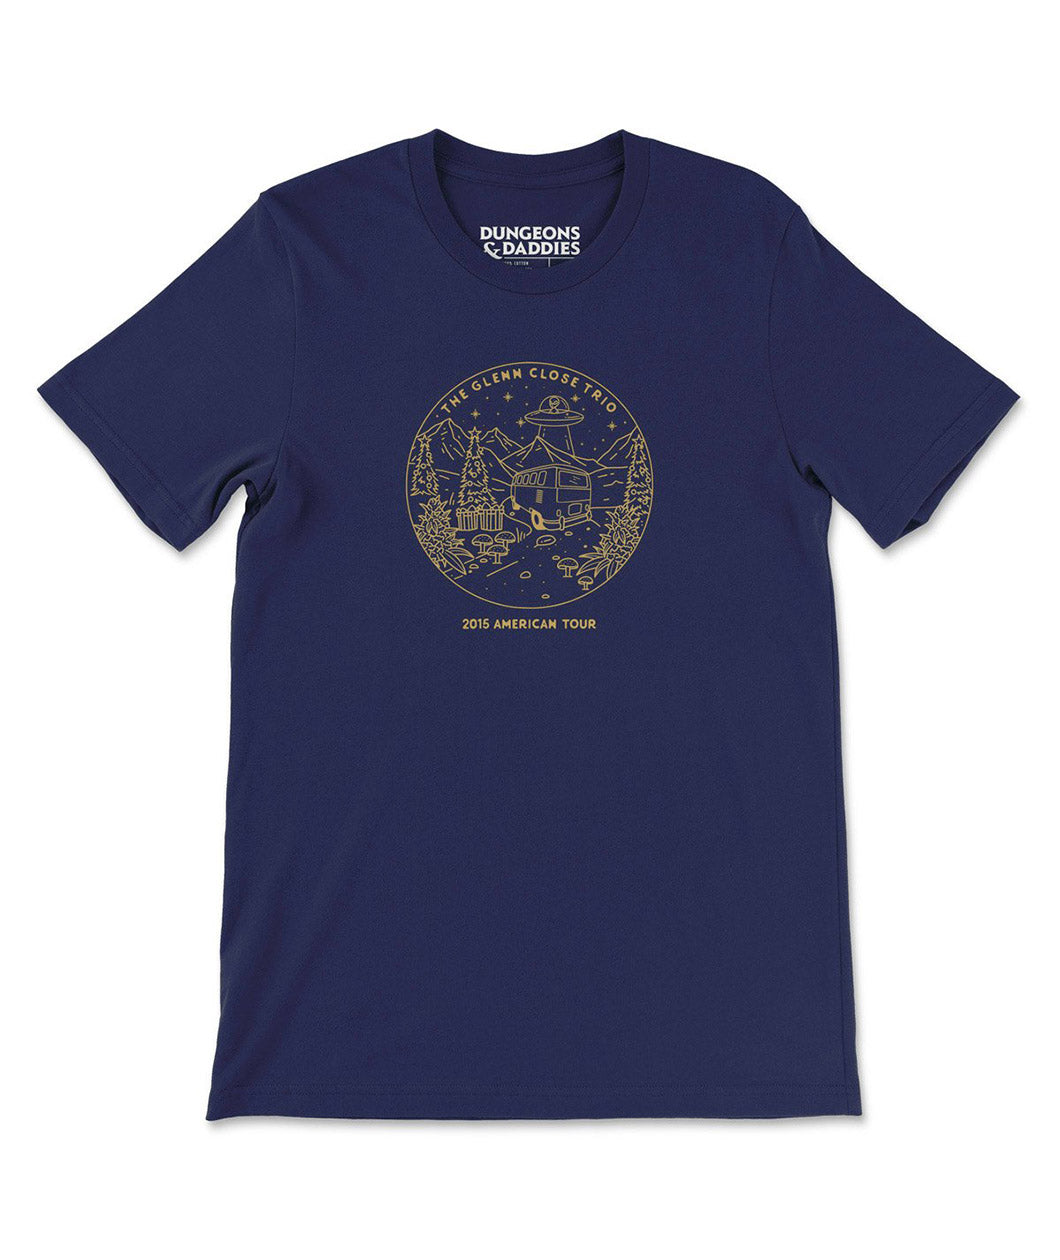 Navy blue t-shirt with yellow illustrated line drawing of a town with a UFO over it that says in small lettering 